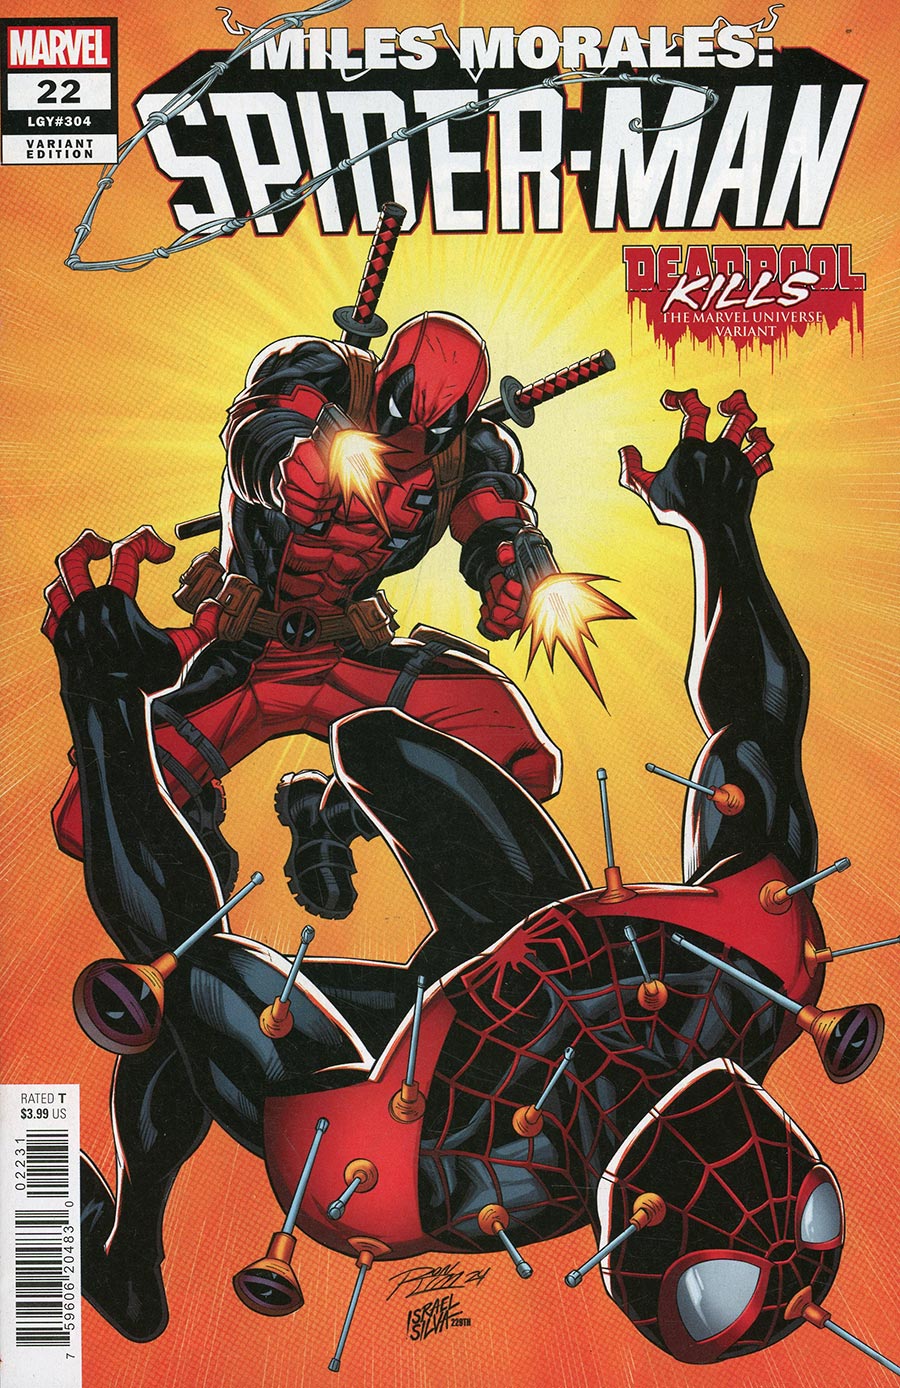 Miles Morales Spider-Man Vol 2 #22 Cover B Variant Ron Lim Deadpool Kills The Marvel Universe Cover (Blood Hunt Tie-In)